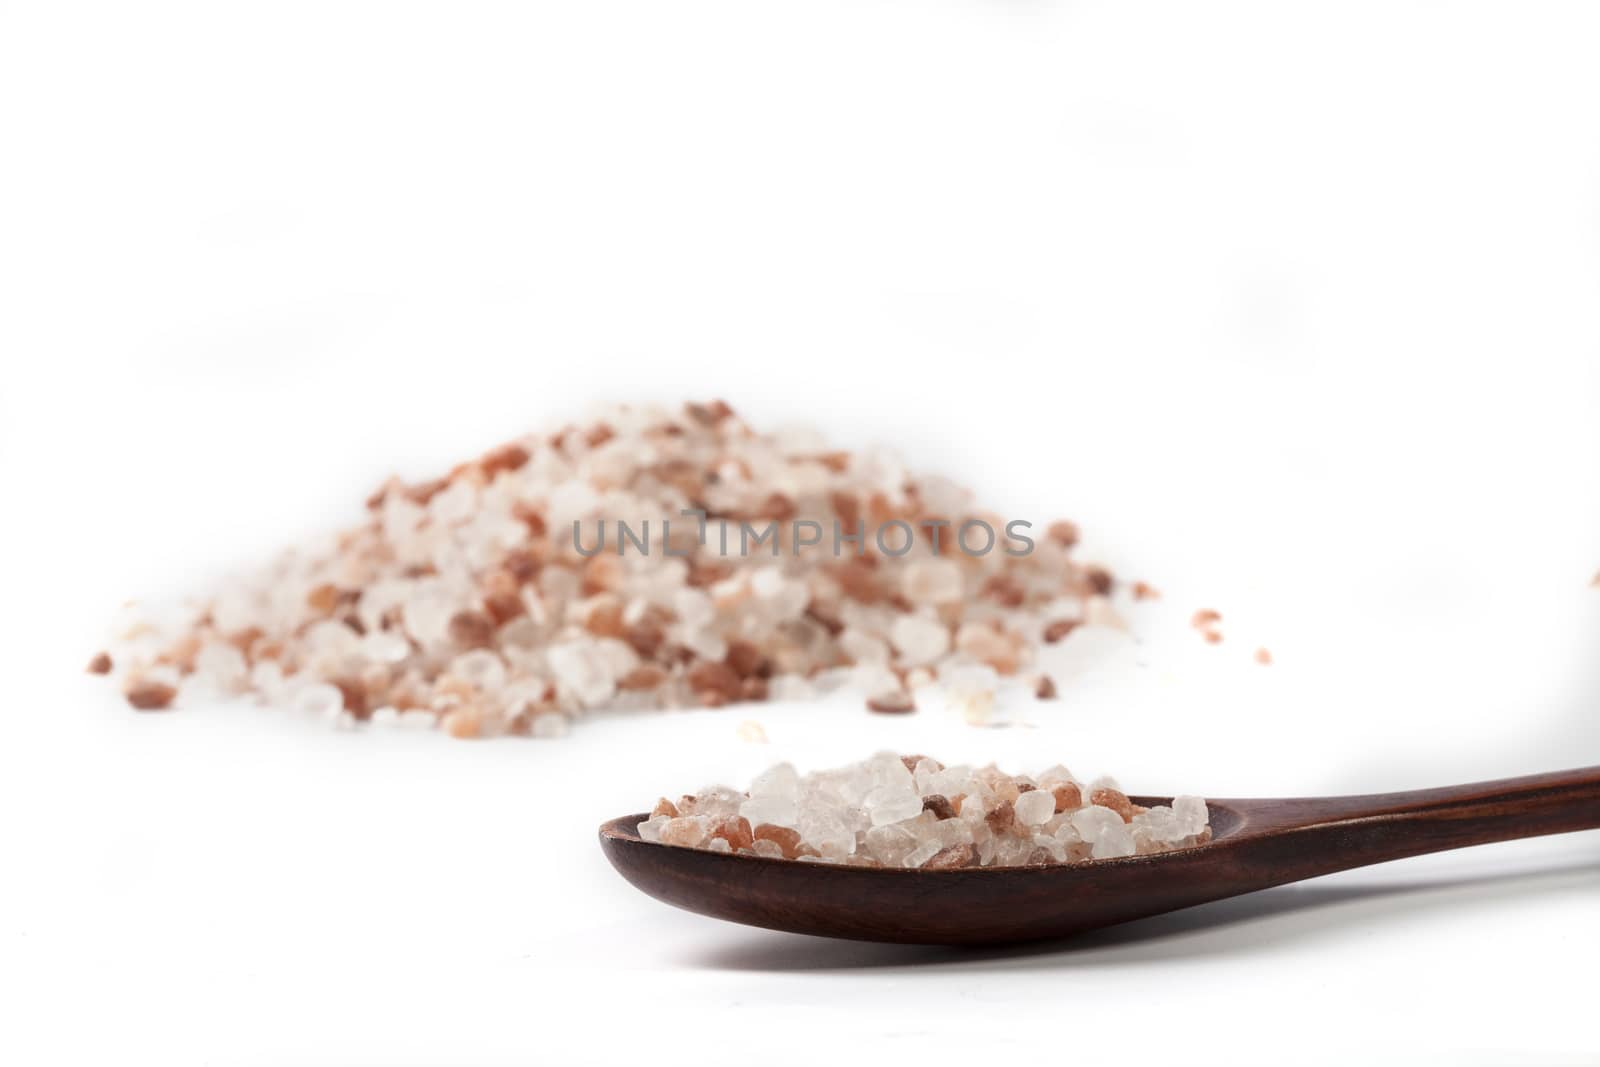 Himalayan Salt Raw Crystals Pile with Brown Wood Spoon Isolated on White Background